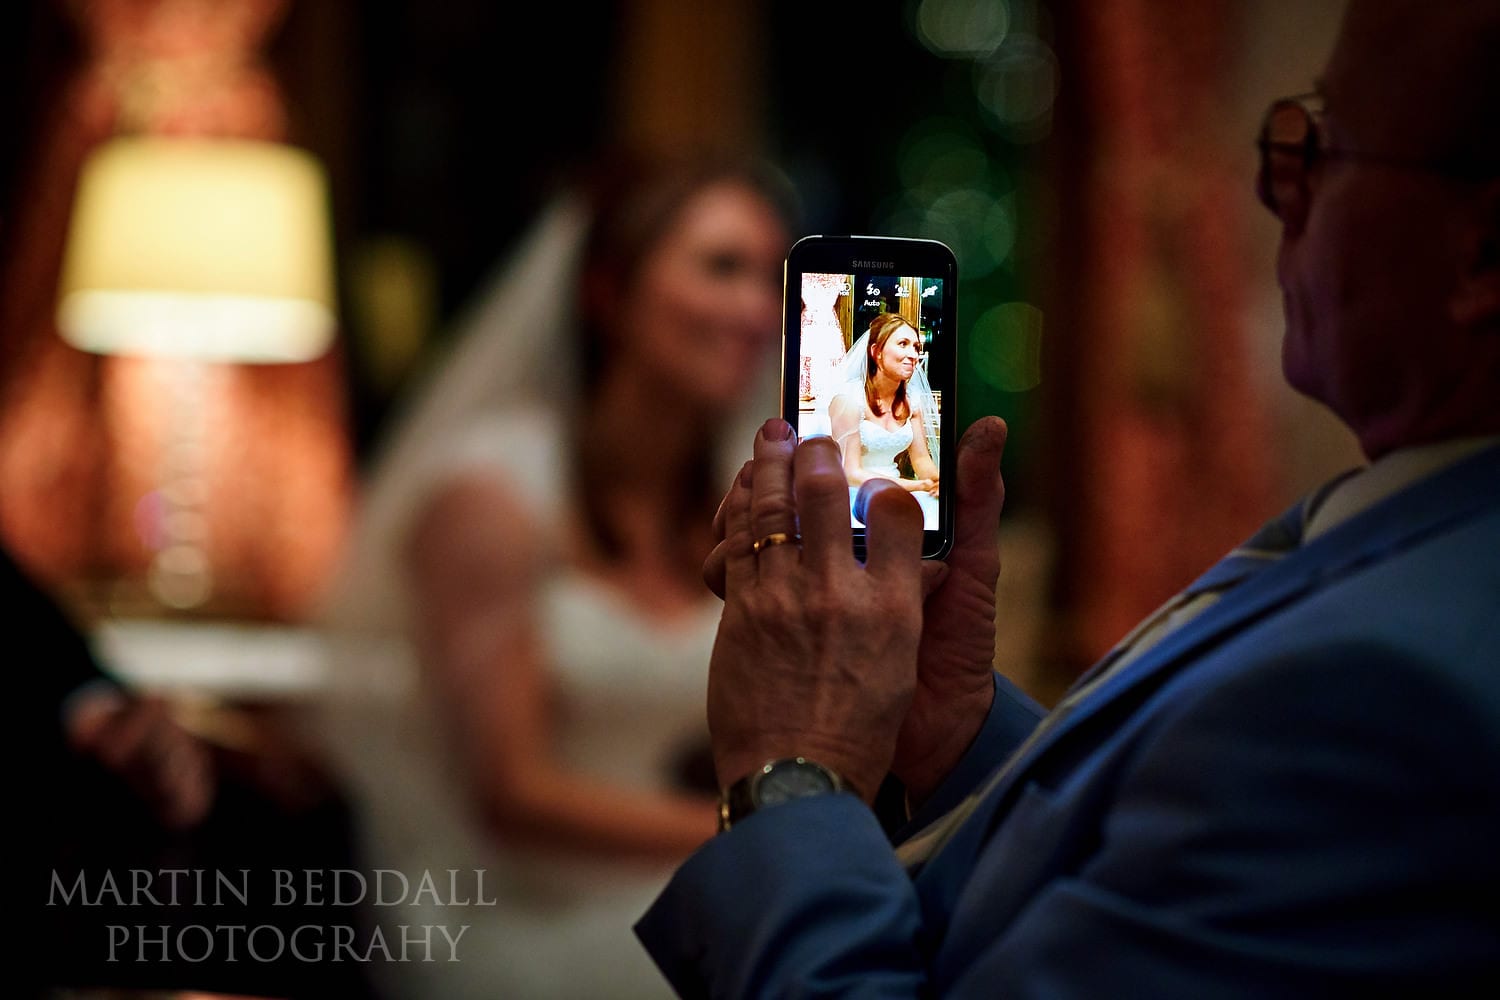 Capturing a picture of the bride